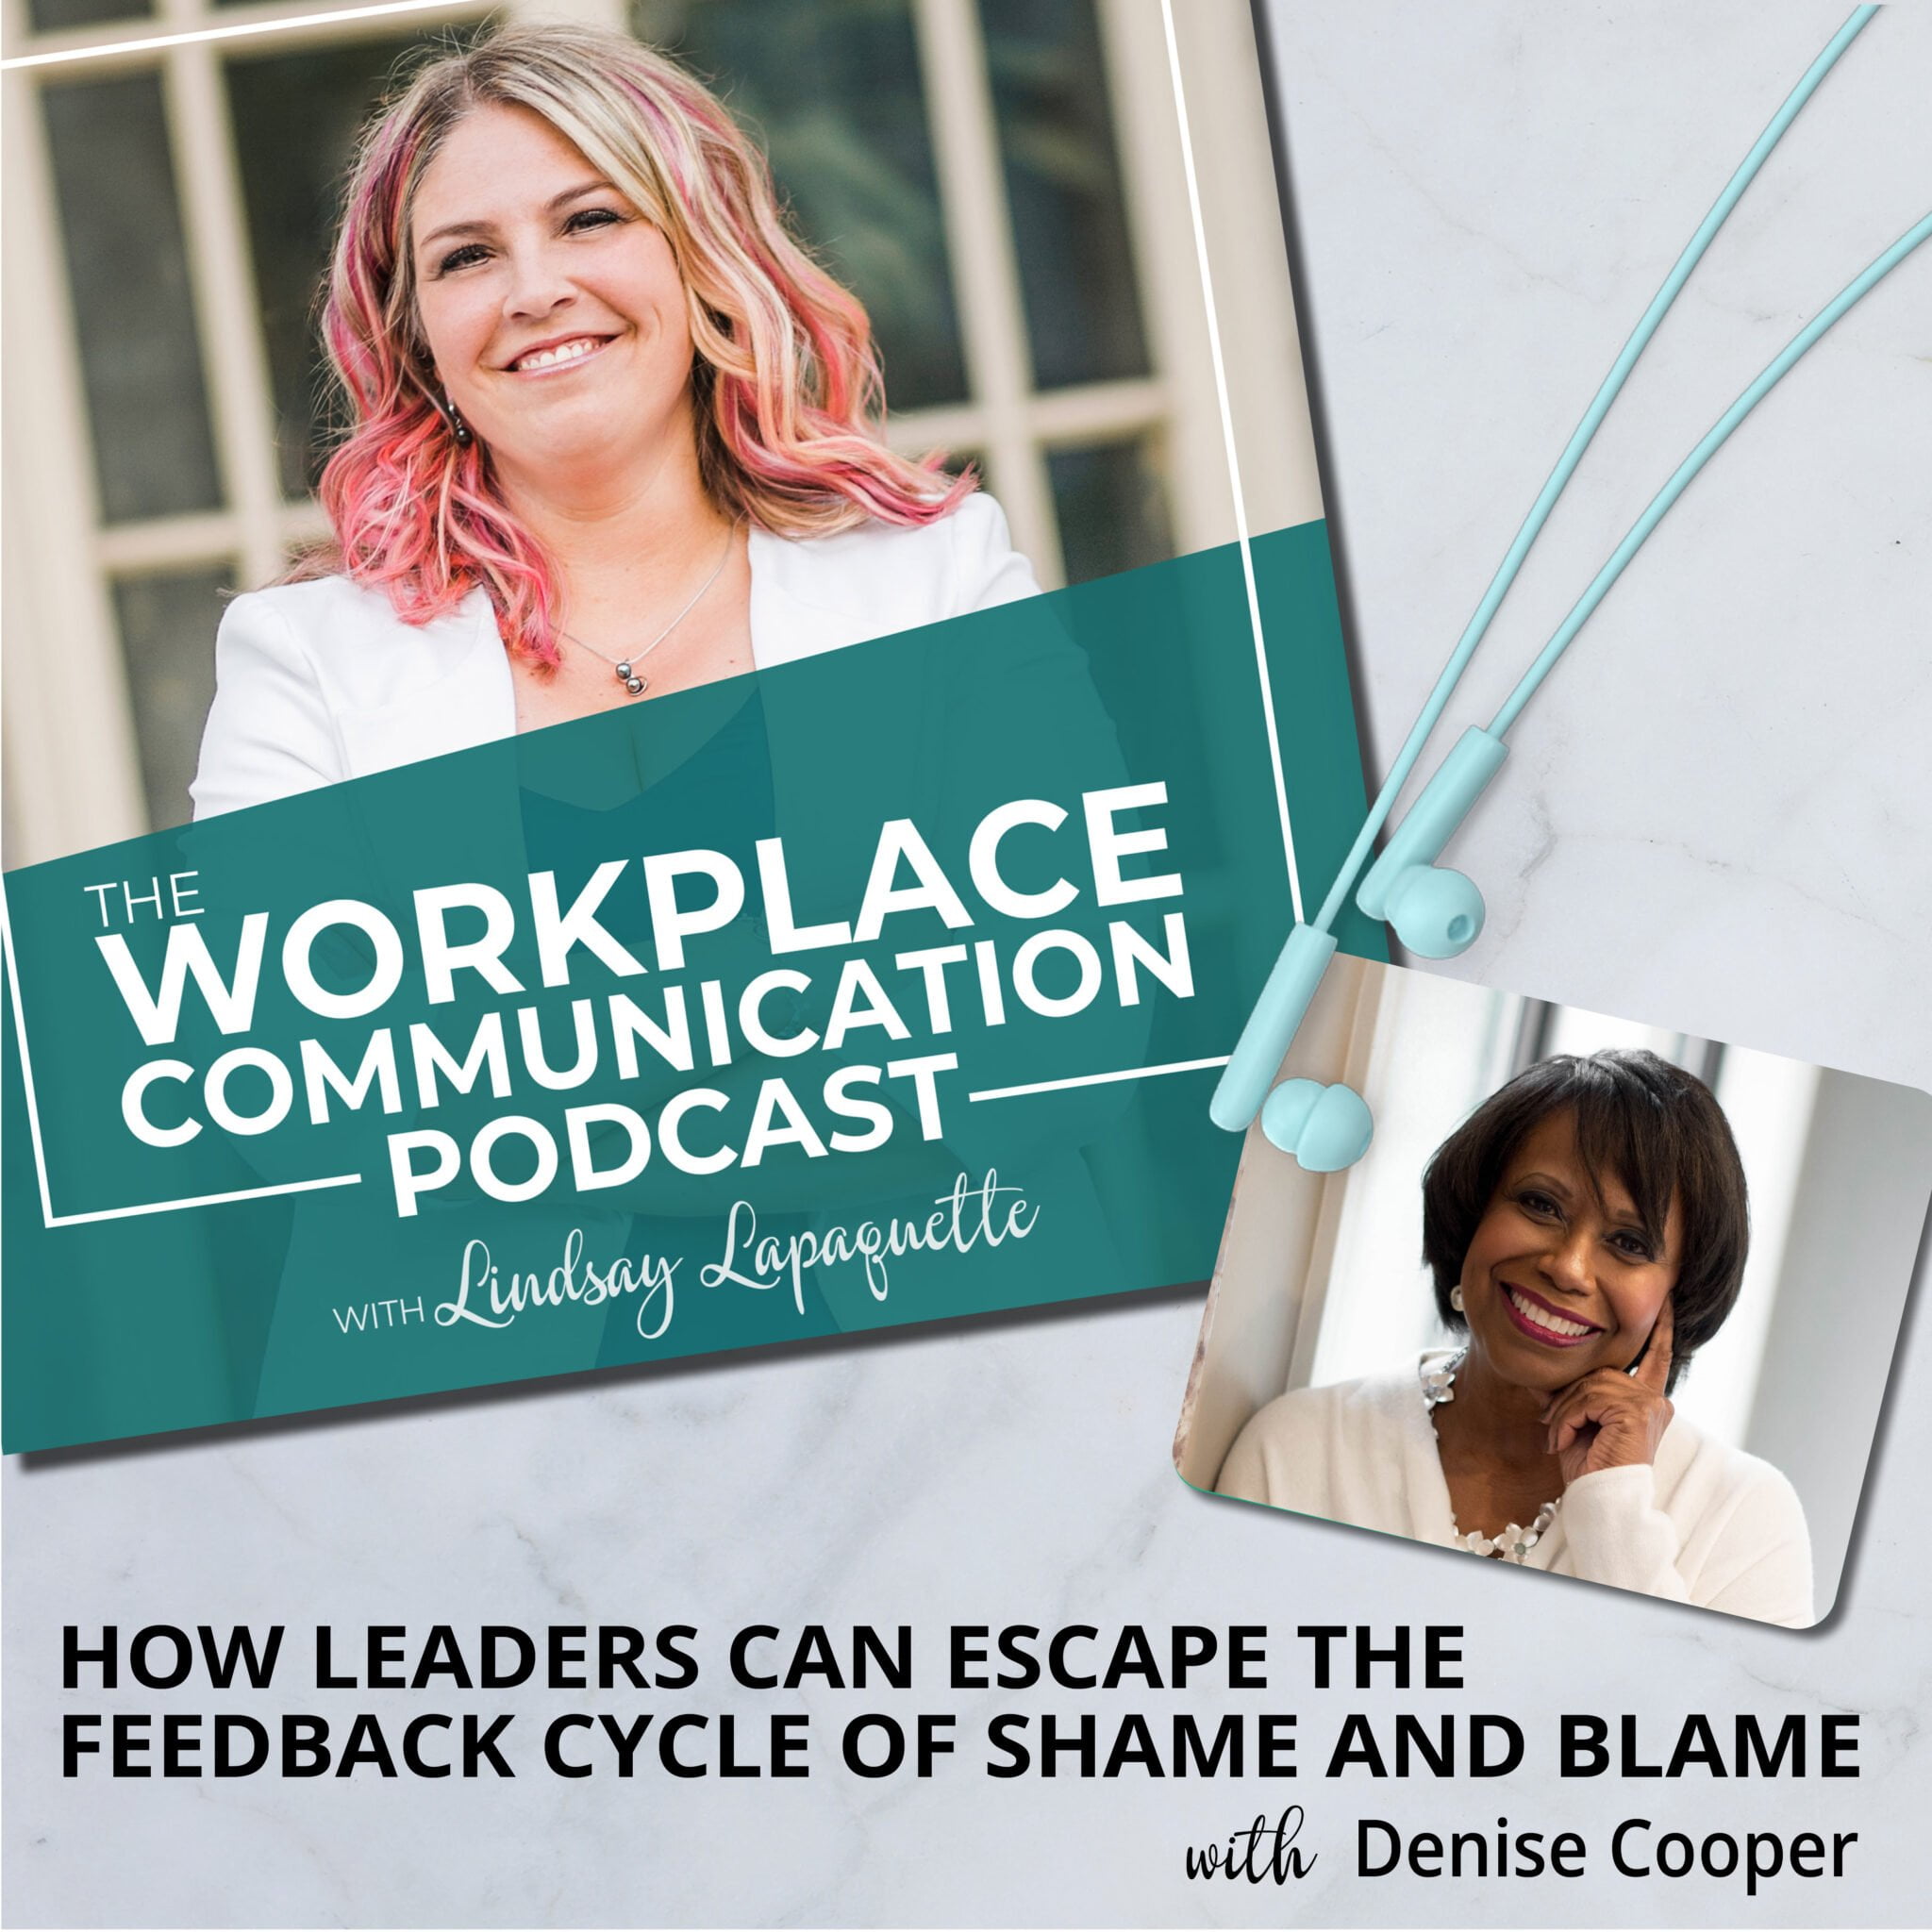 Lire la suite à propos de l’article #061 – How Leaders Can Escape the Feedback Cycle of Shame and Blame with Denise Cooper